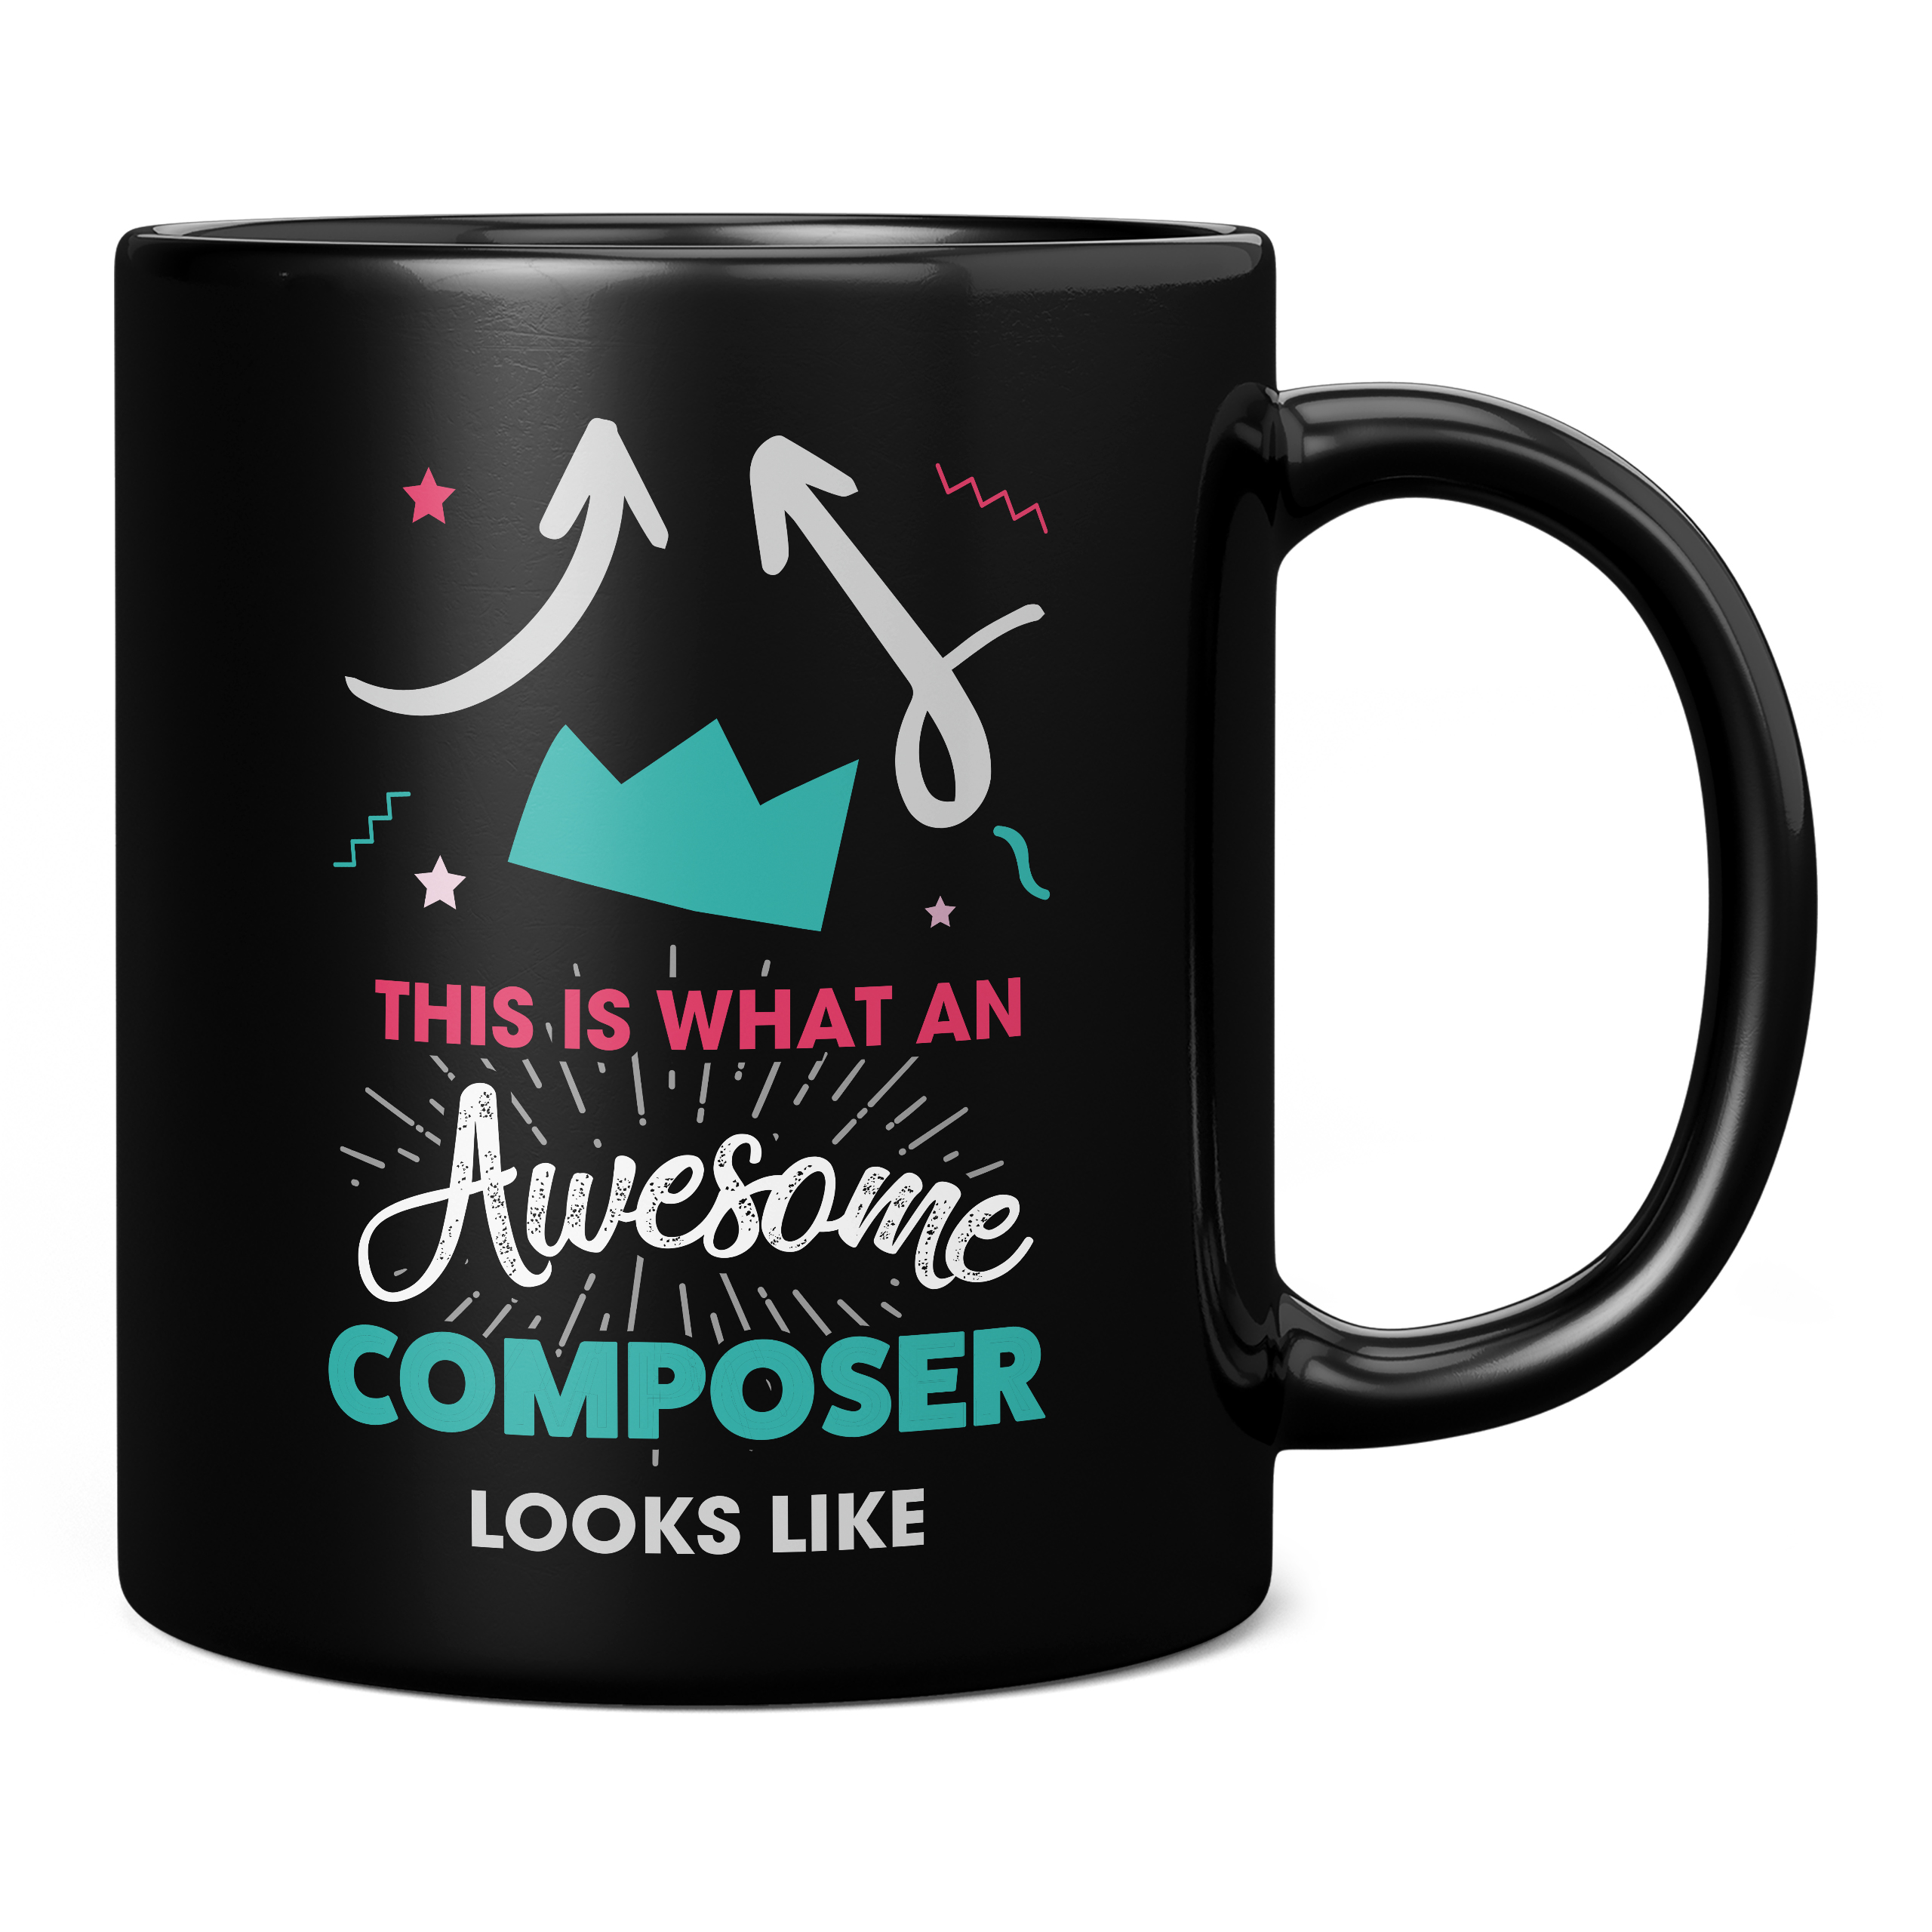 THIS IS WHAT AN AWESOME COMPOSER LOOKS LIKE 11OZ NOVELTY MUG